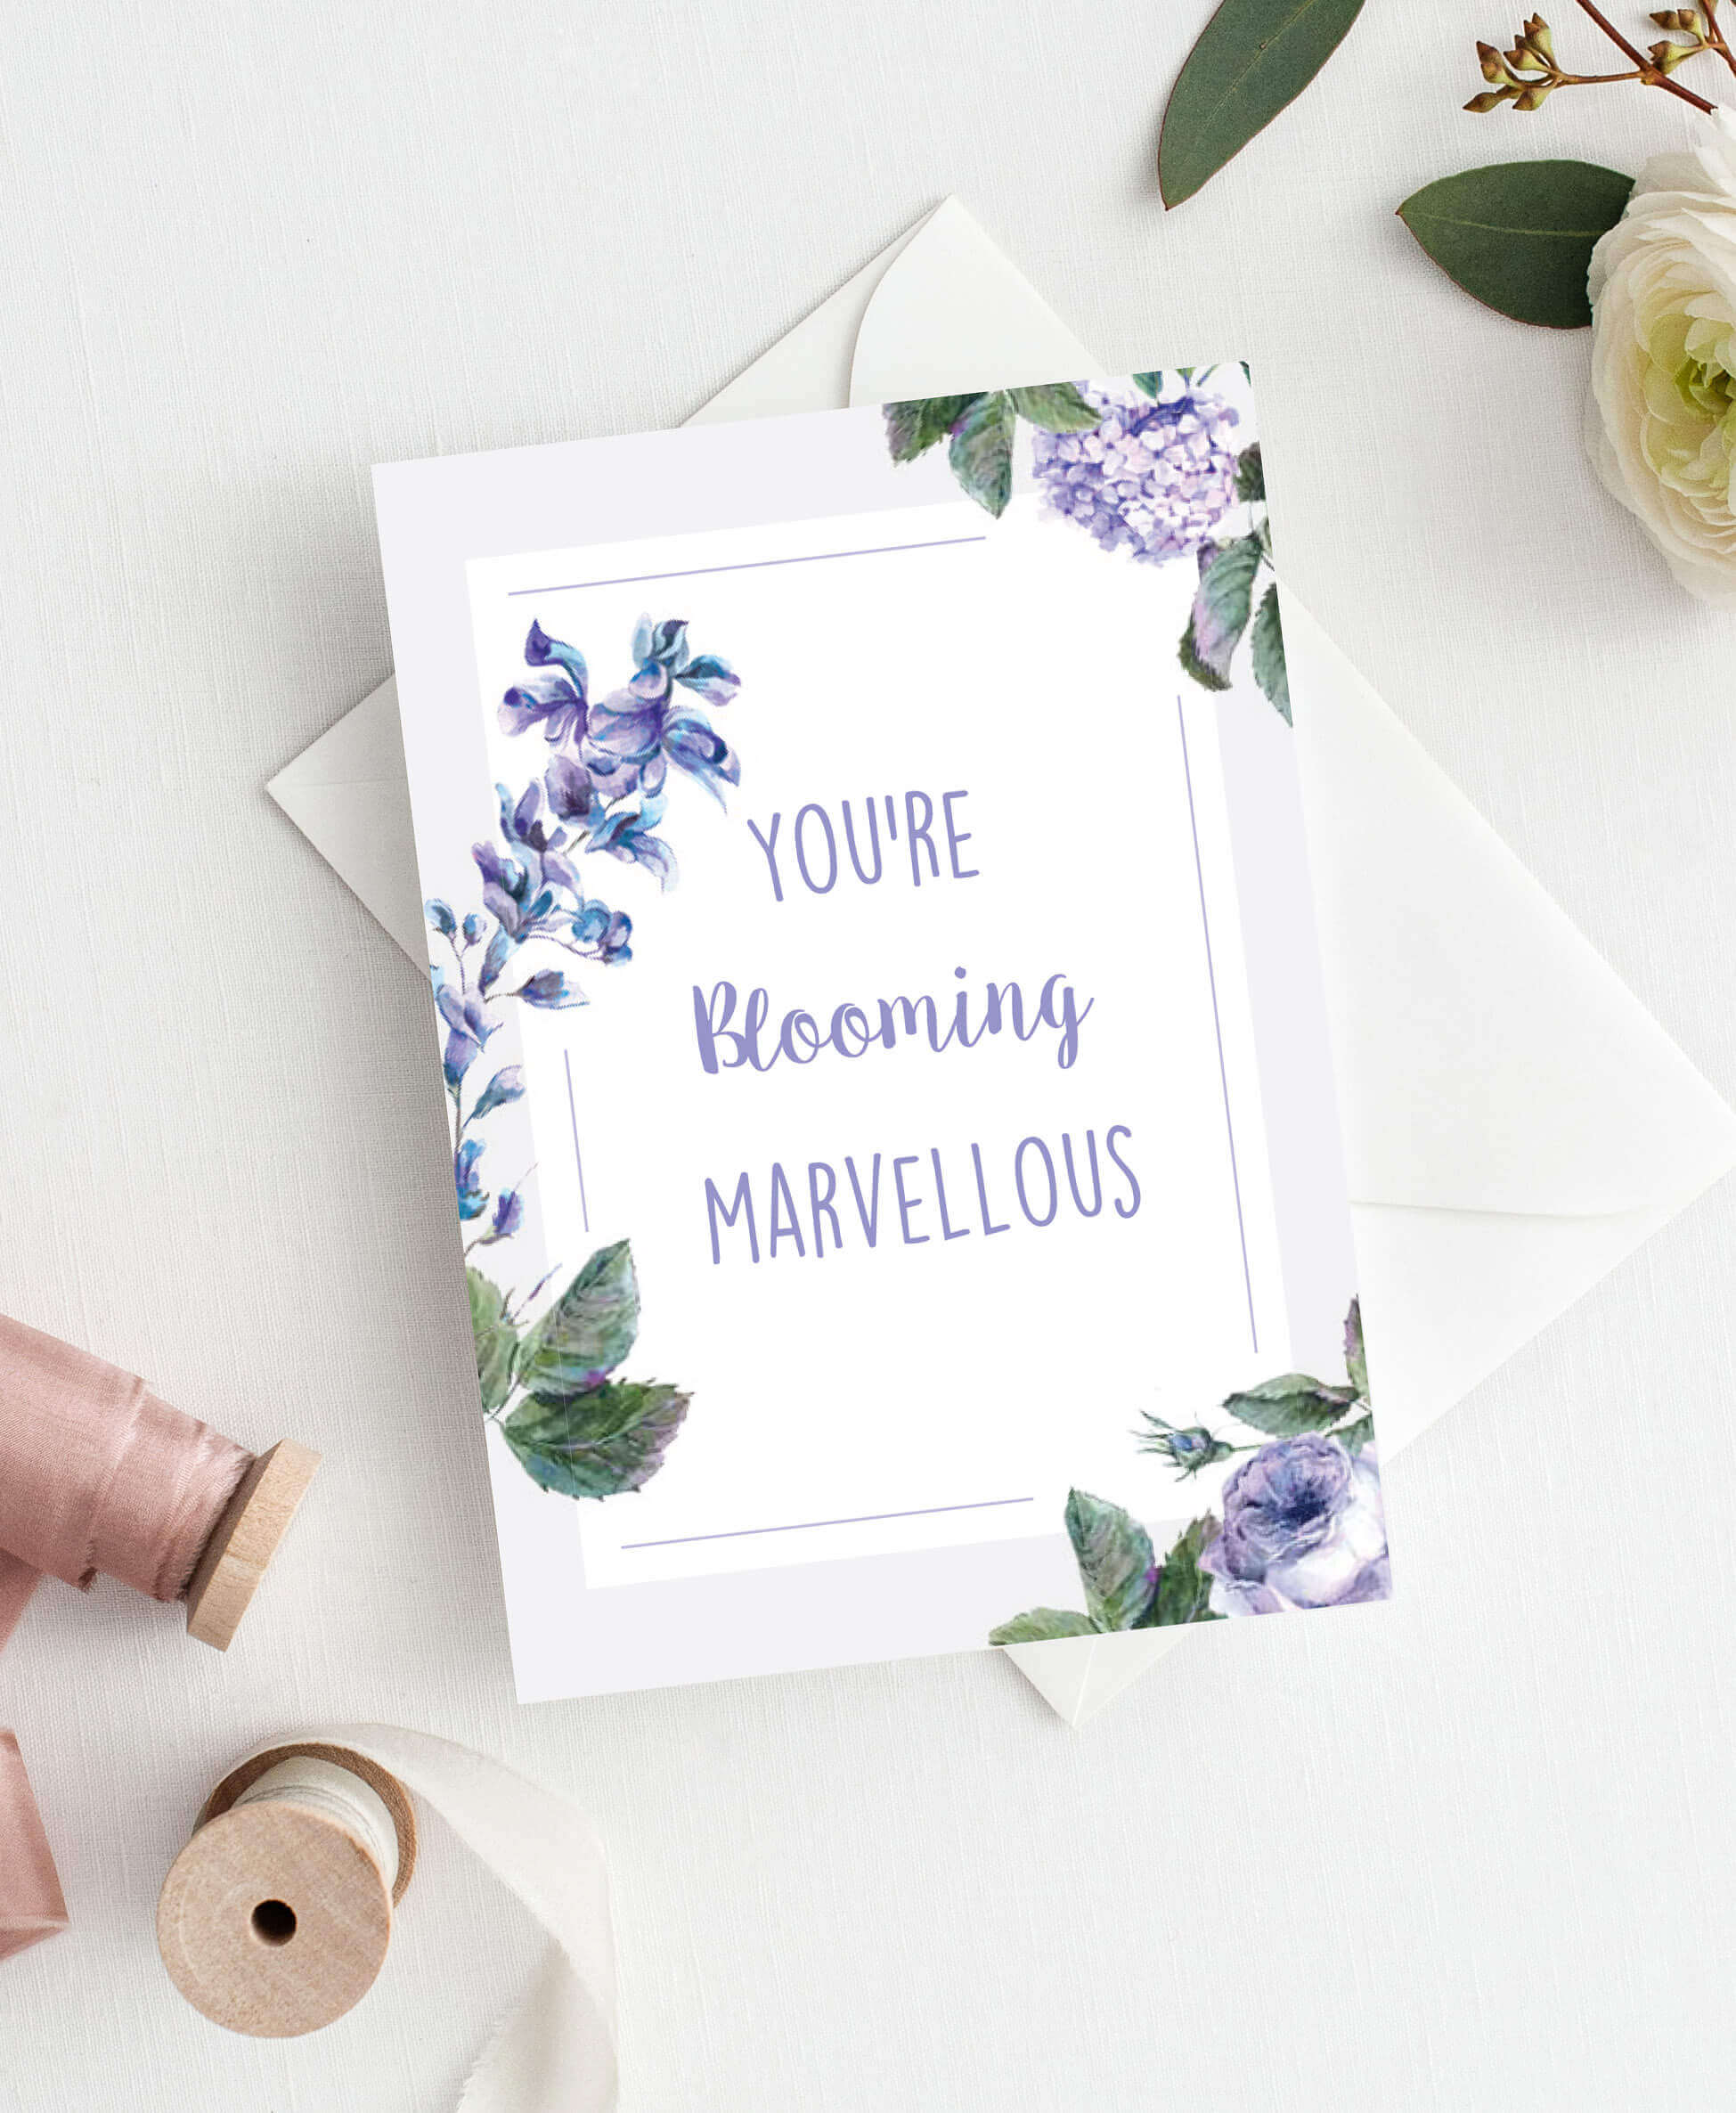 You're Blooming Marvellous Mother's day card designed by Rodo